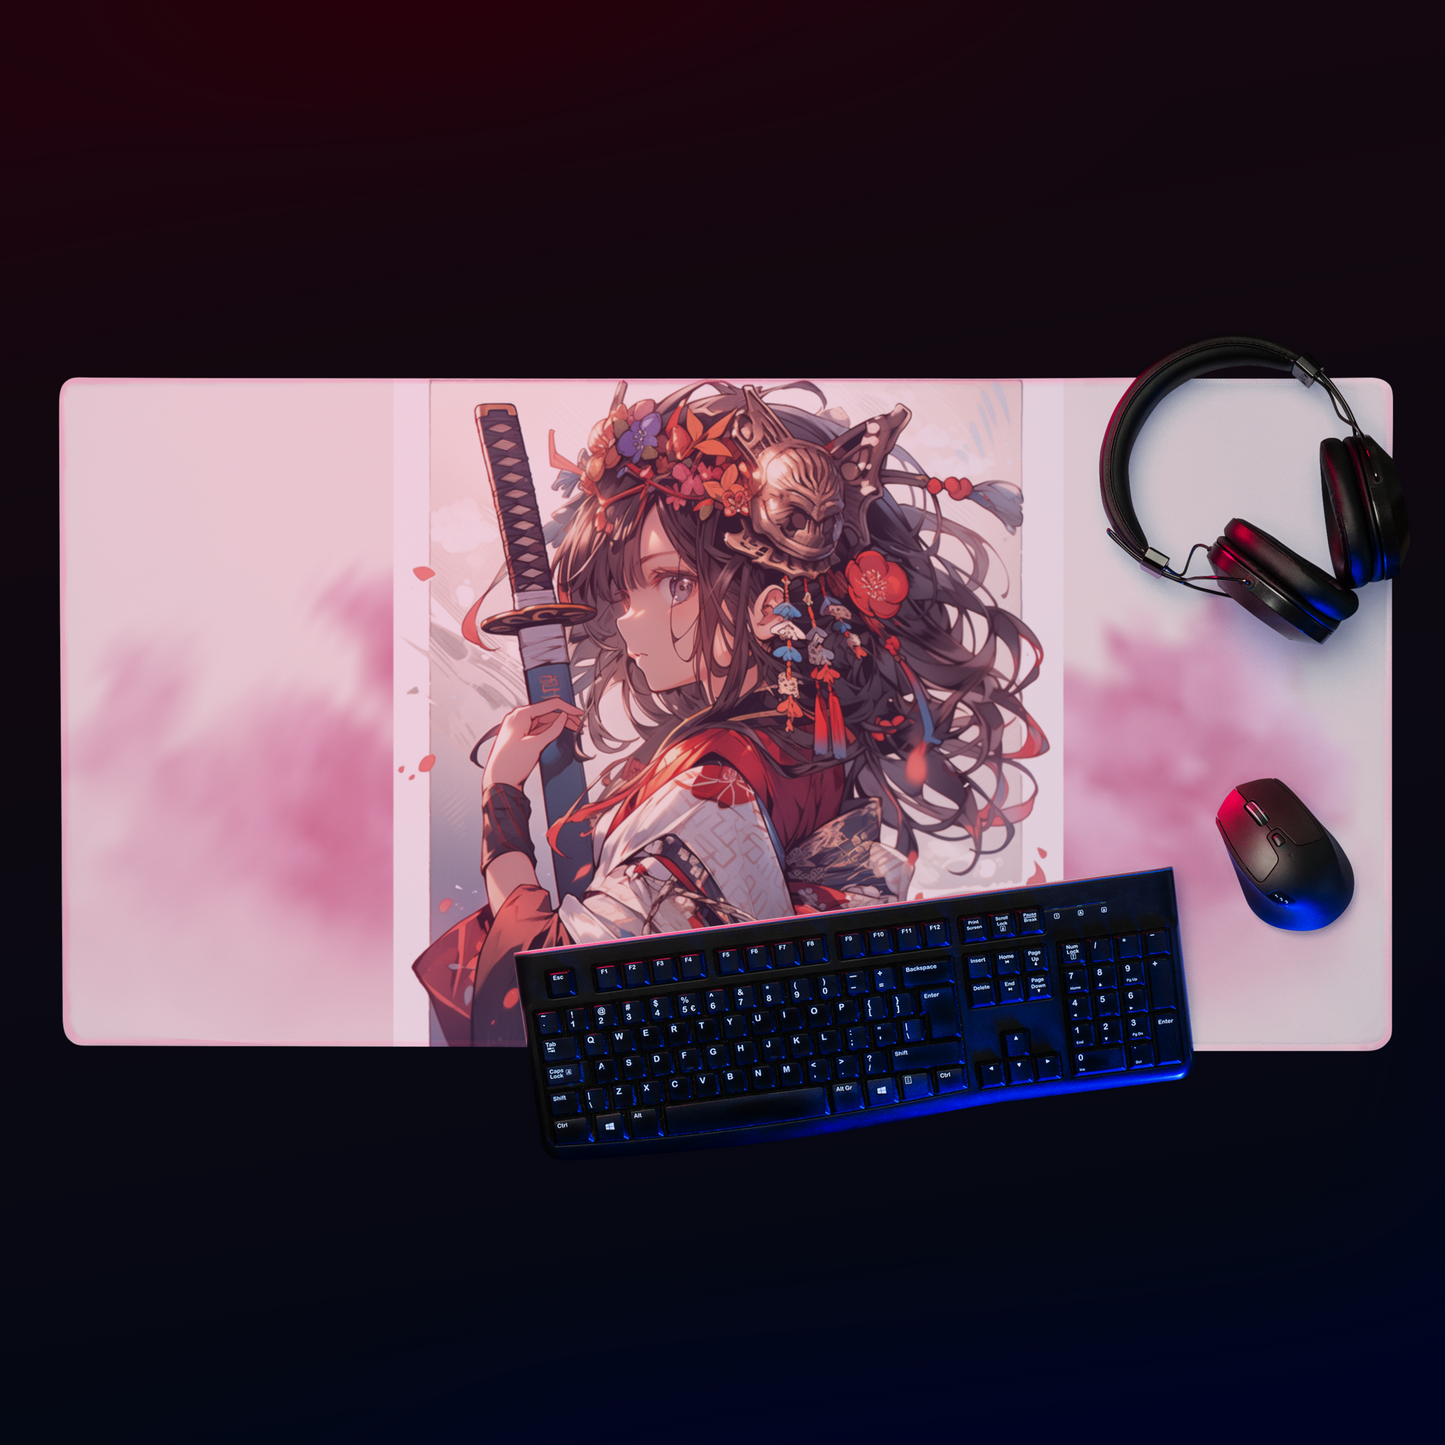 Extended Gaming Mouse Pad: 38"x18" - Anime Art of Geisha Holding Sword - Precision Surface for Gamers